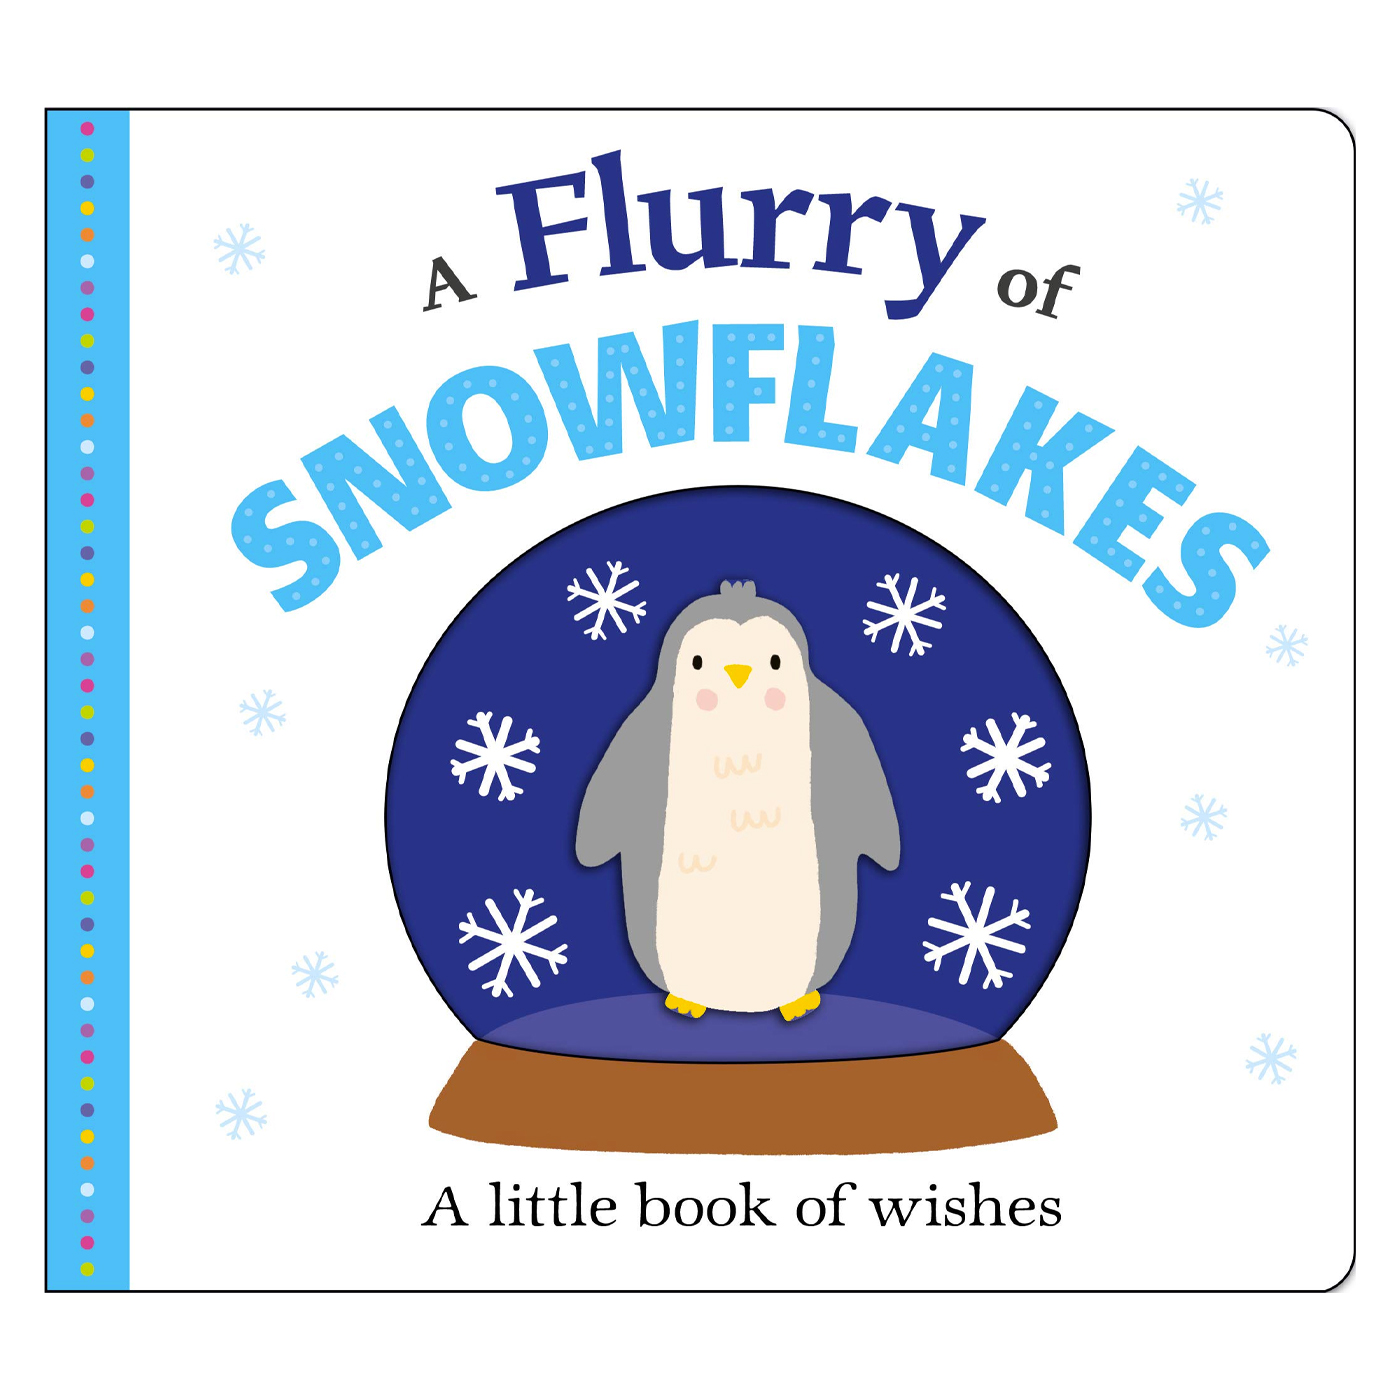 PRIDDY BOOKS A Flurry Of Snowflakes